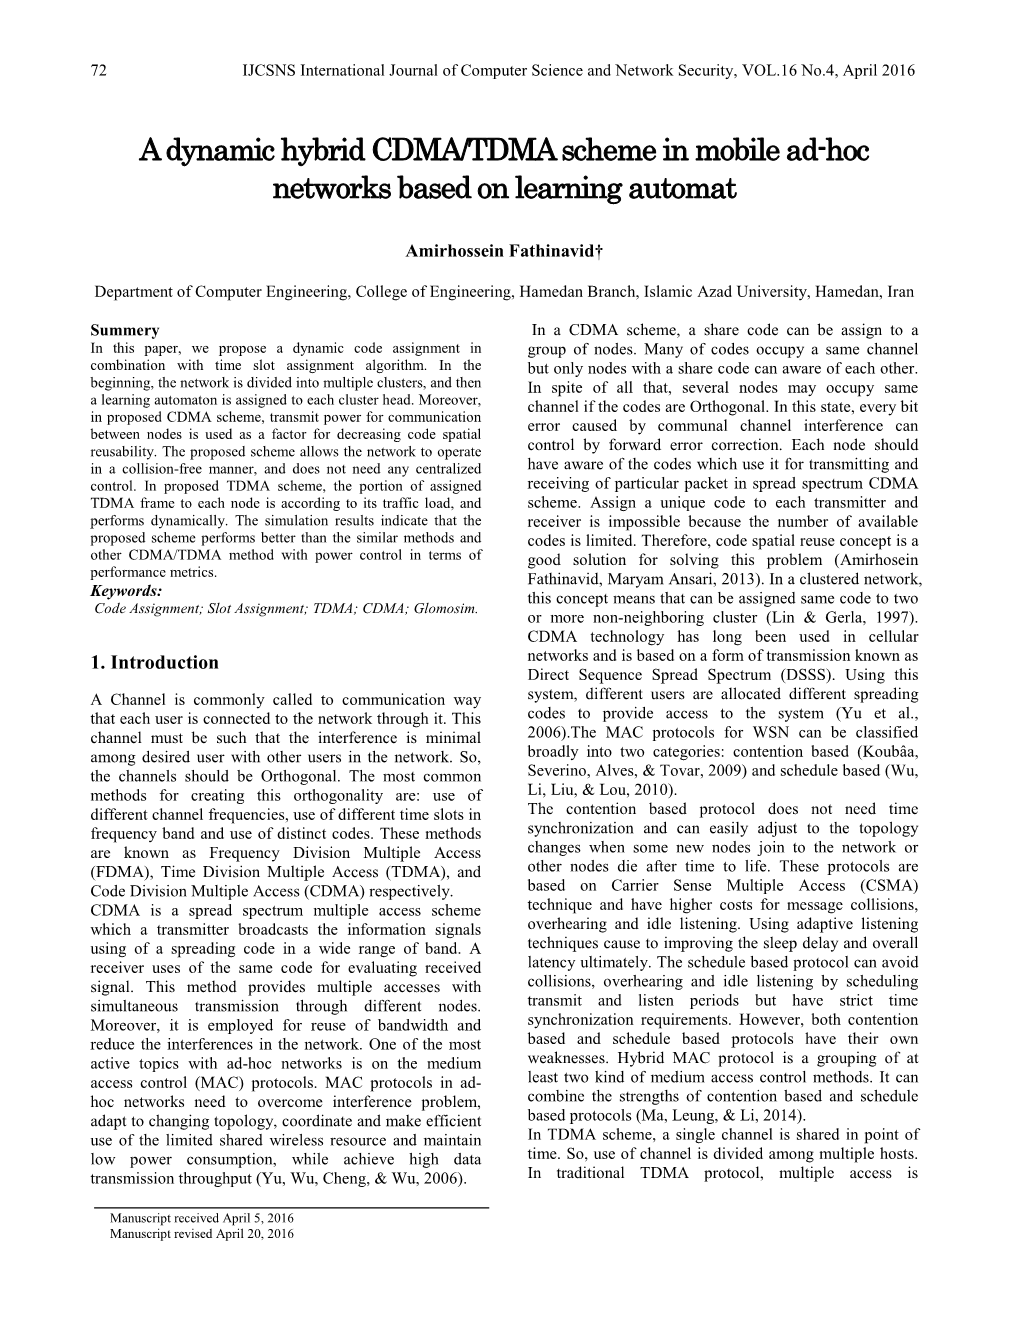 A Dynamic Hybrid CDMA/TDMA Scheme in Mobile Ad-Hoc Networks Based on Learning Automat